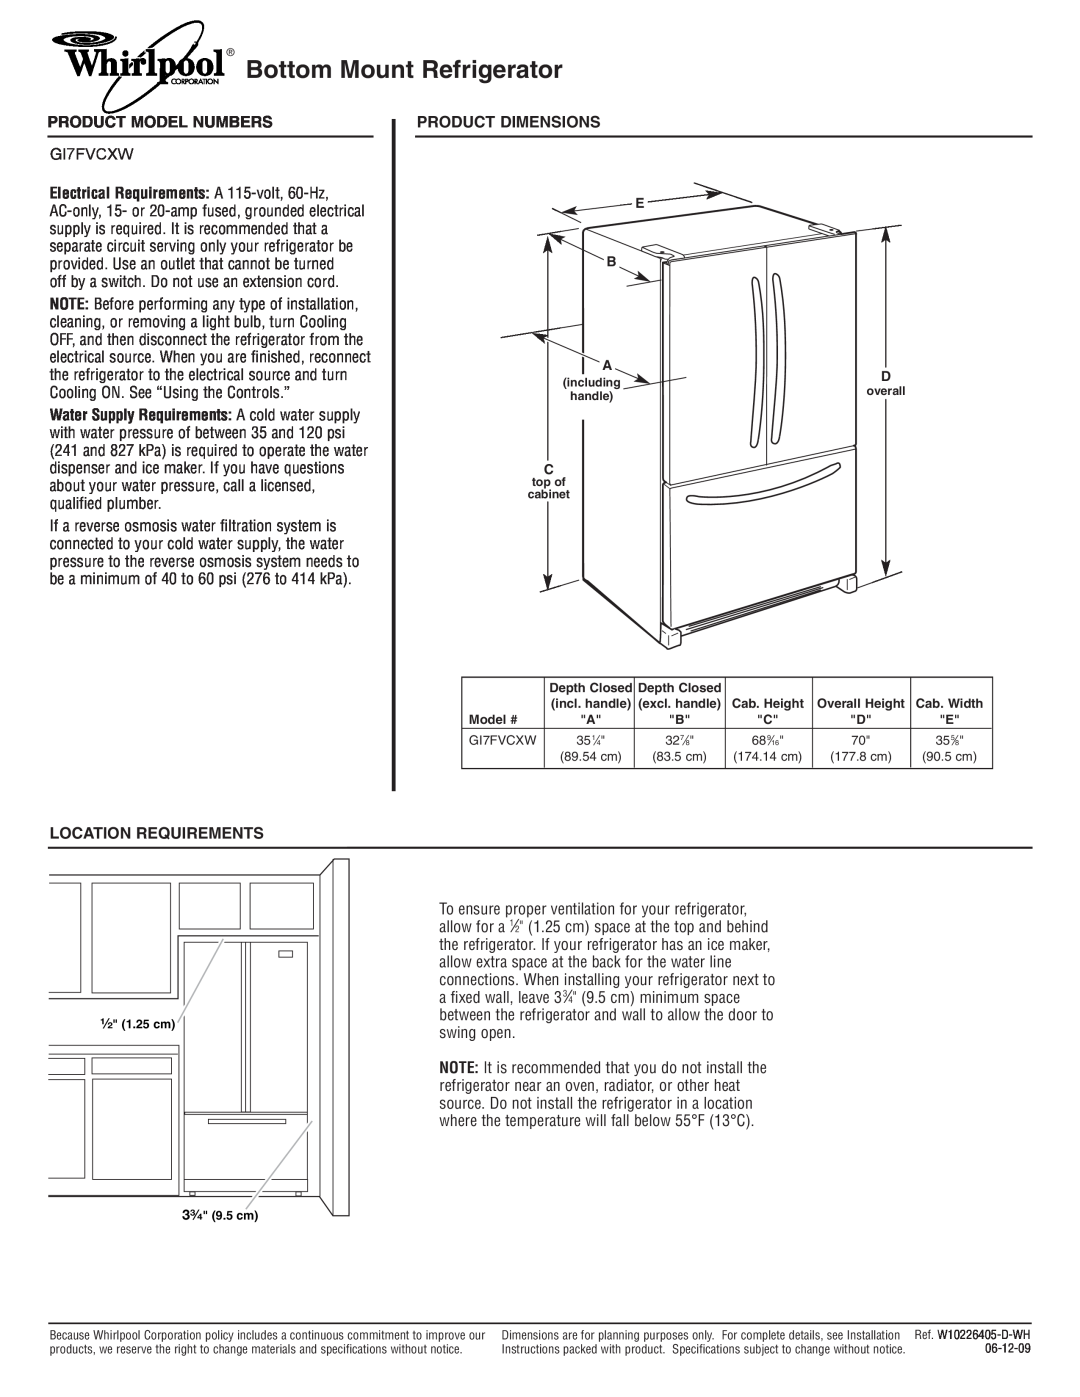 Whirlpool GI7FVCXW dimensions Bottom Mount Refrigerator, Product Model Numbers, Product Dimensions, Location Requirements 